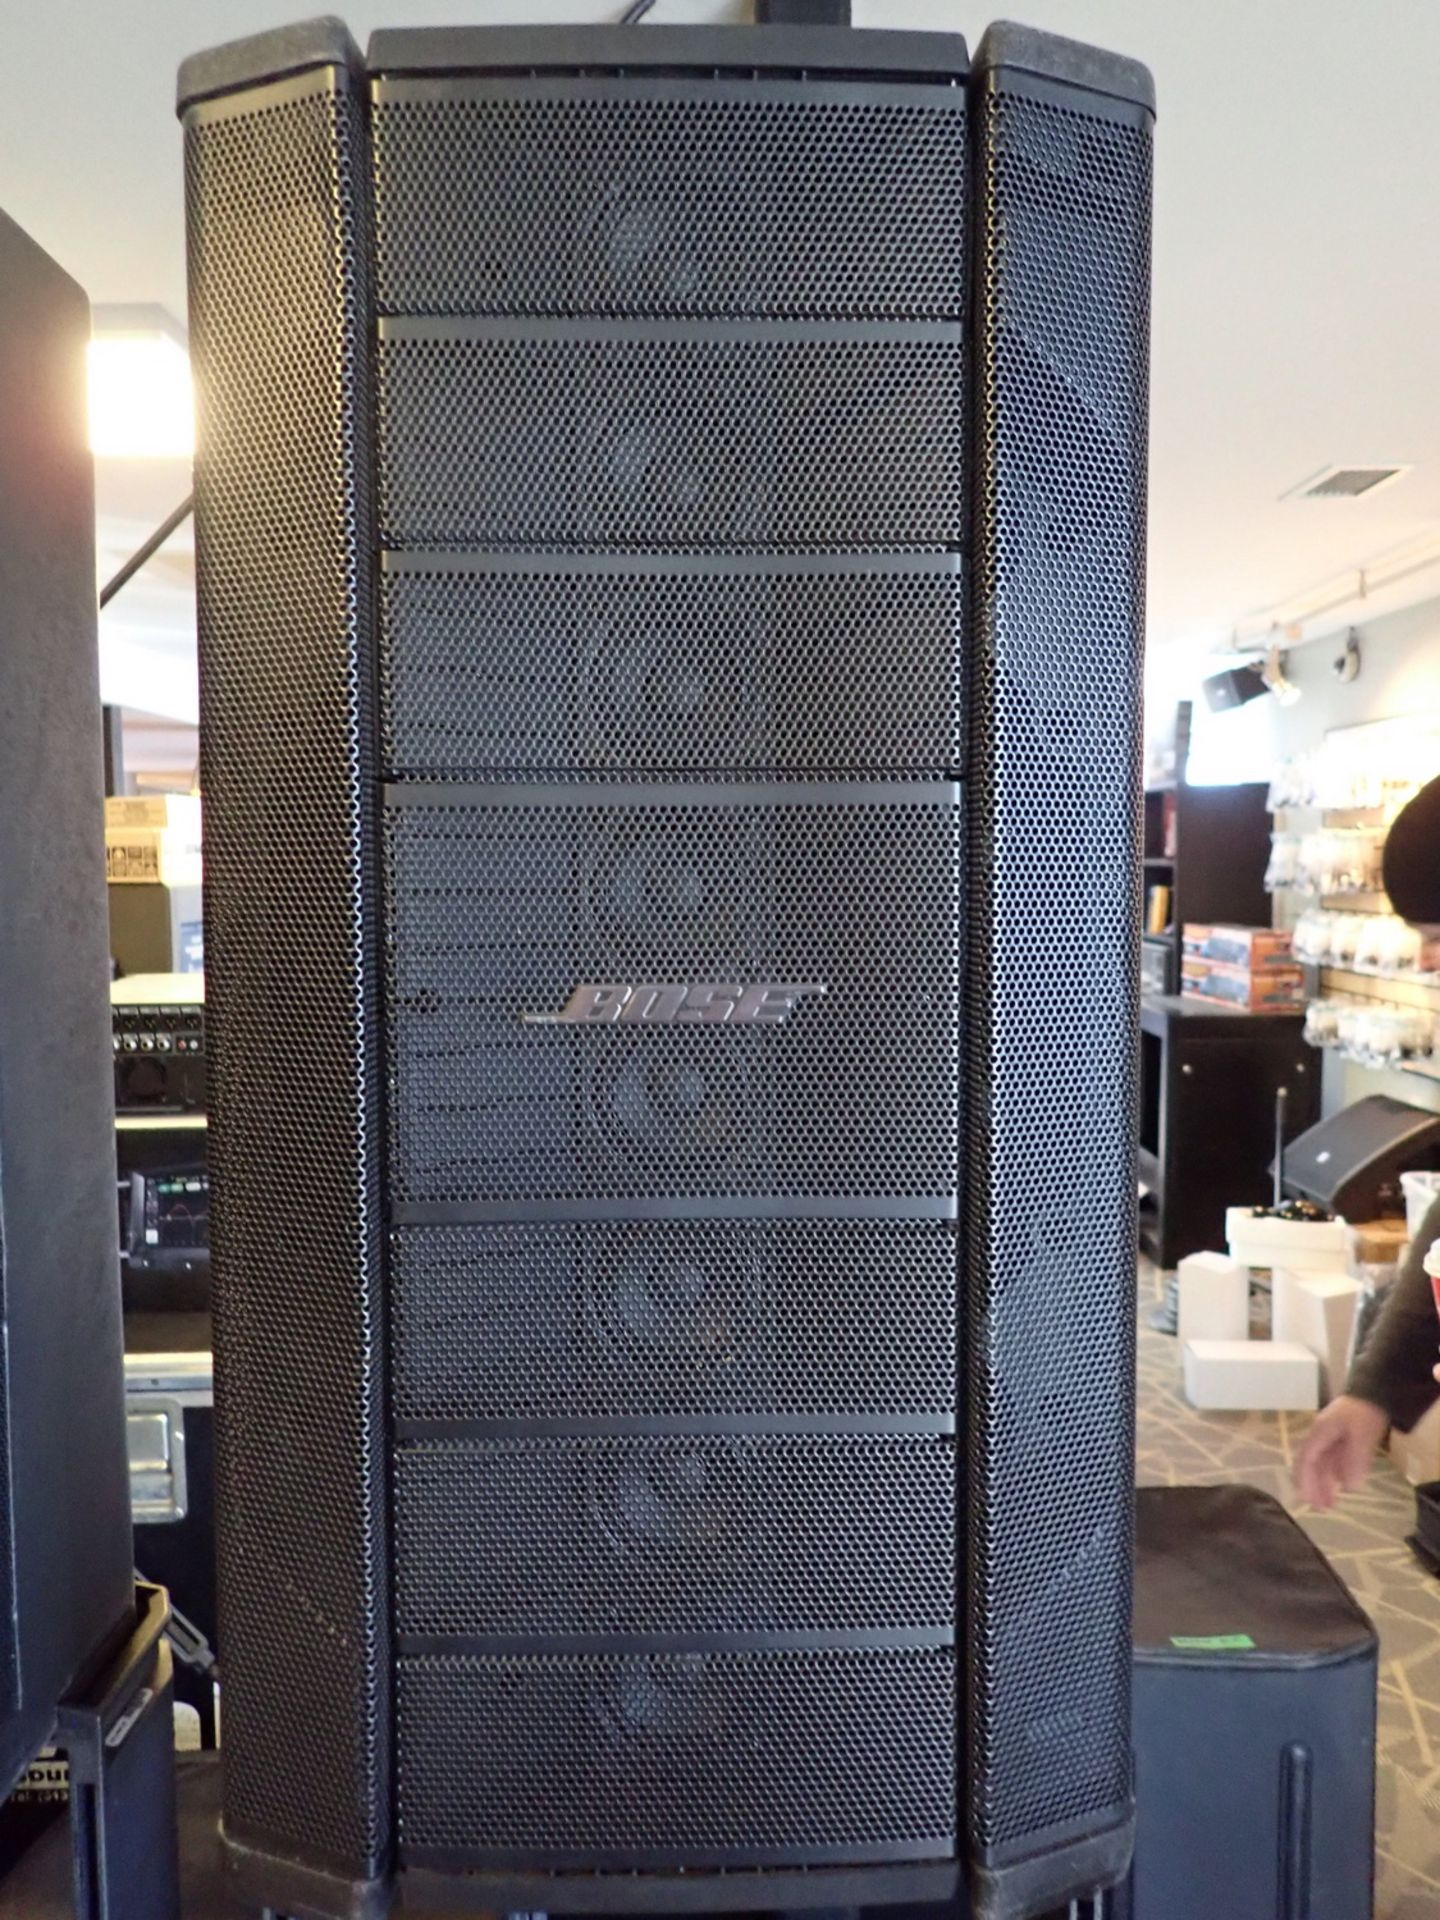 LOT - BOSE F1 812 FLEXIBLE ARRAY C/W F1 SUBWOOFER, STAND, & TRAVEL SOFT CASE - Image 2 of 3